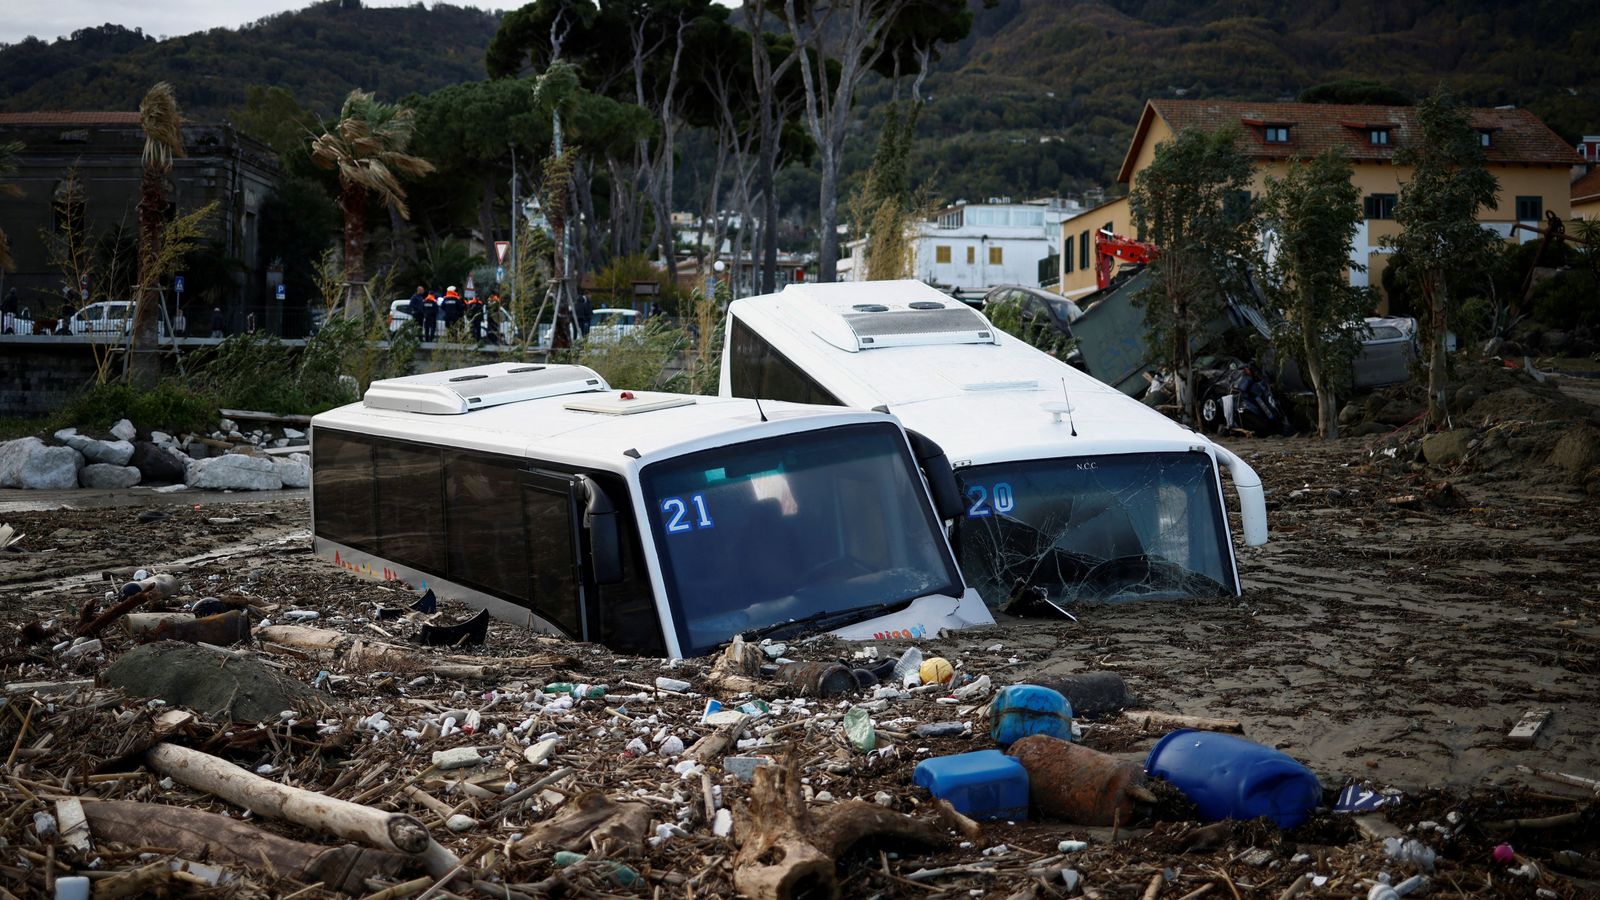 Ischia landslide: Body of young girl pulled from mud as rescue effort continues